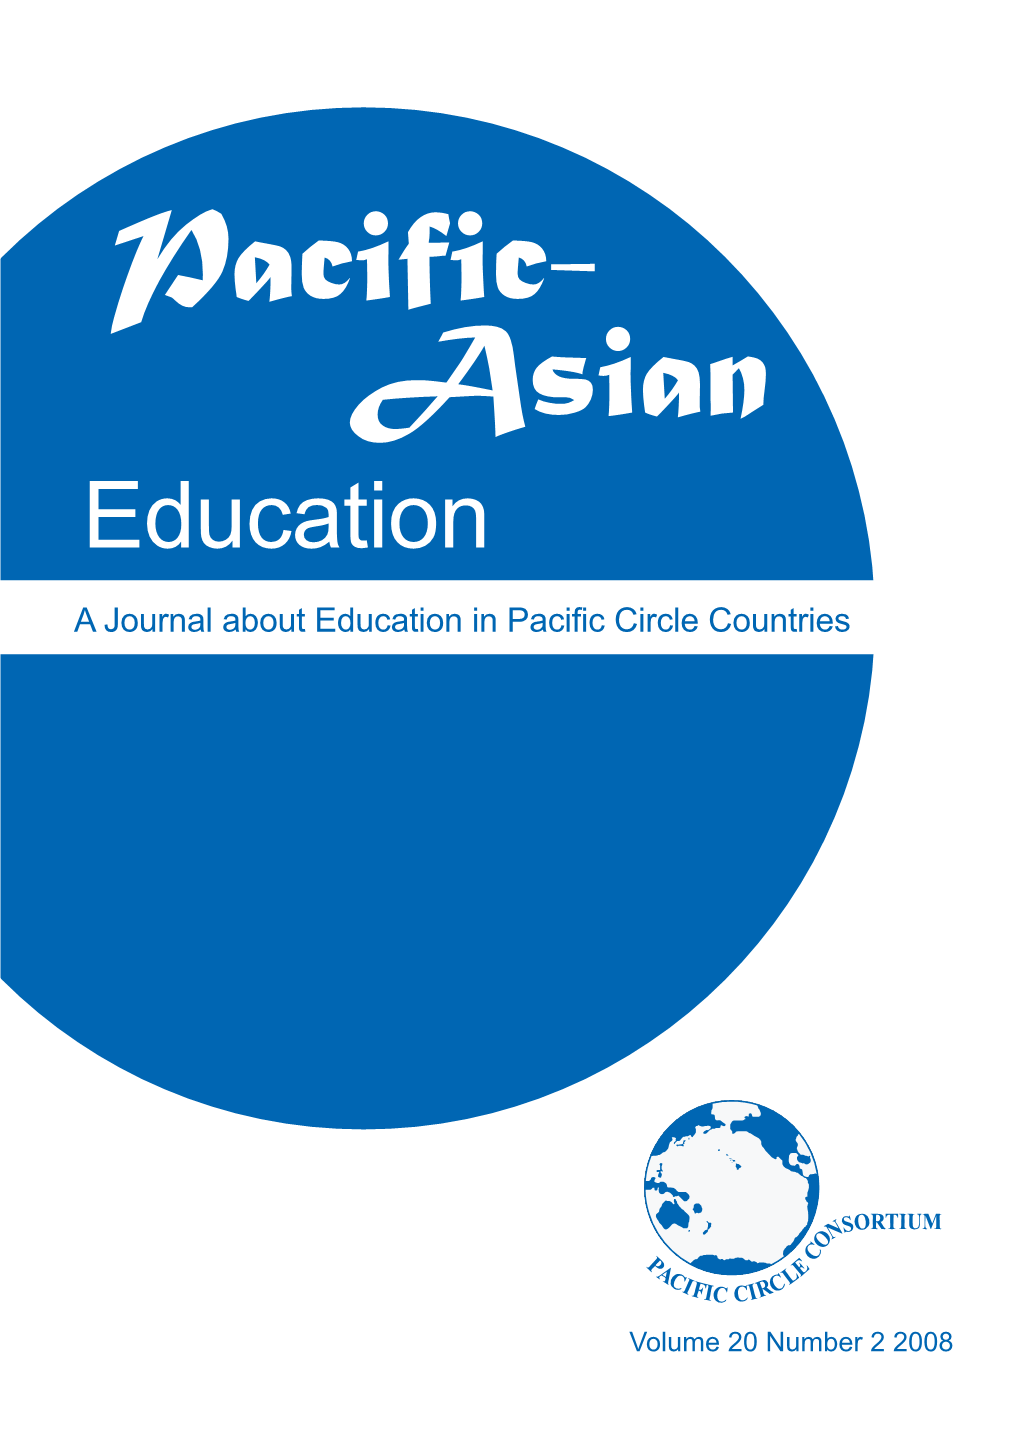 Education a Journal About Education in Pacific Circle Countries